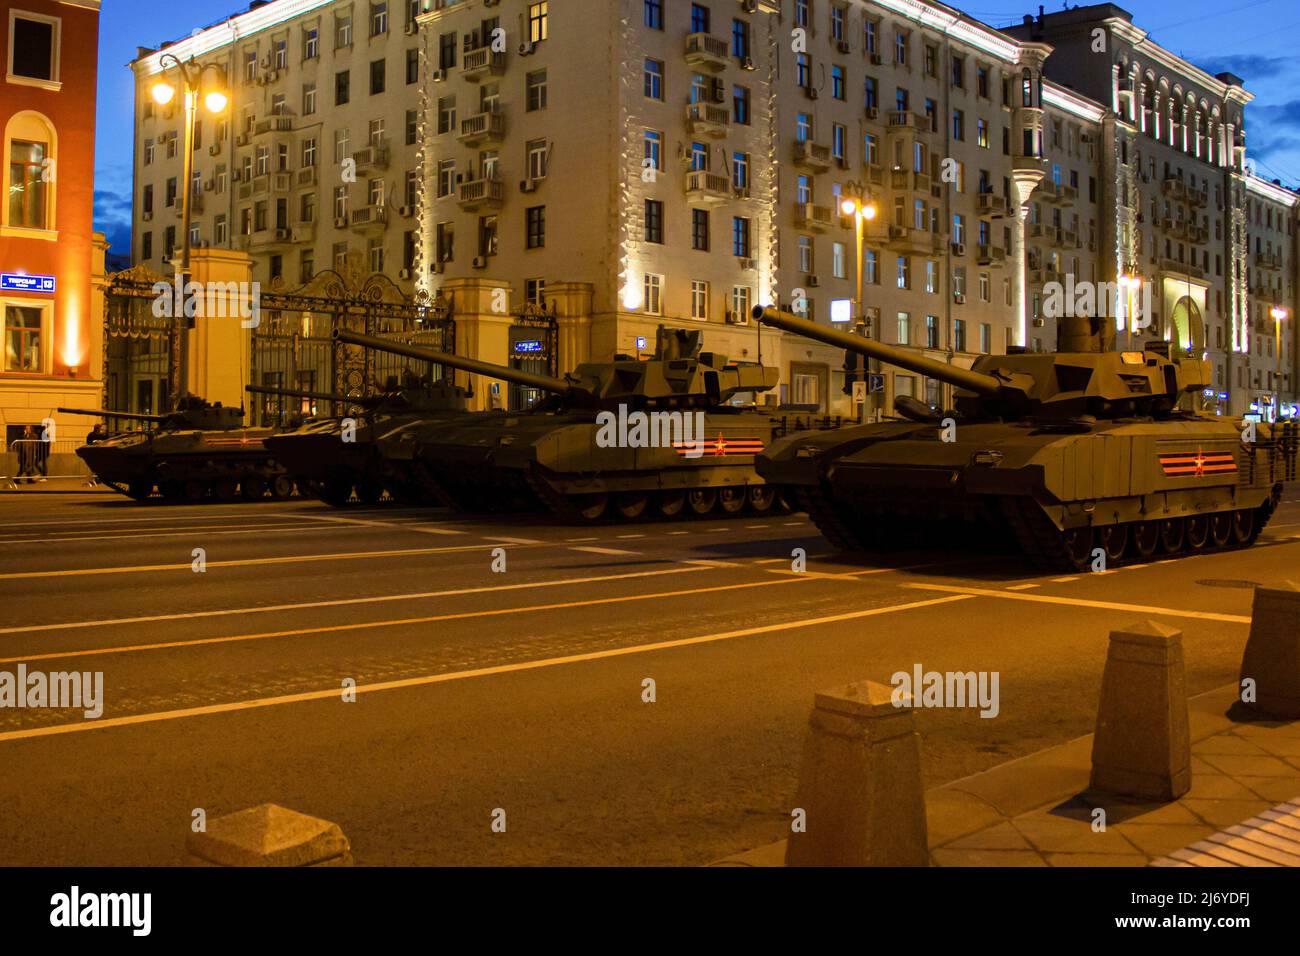 The T-14 Armata tanks seen in formations in front of the mayor's residence on Tverskaya street in Moscow. The final night rehearsal of the traditional Victory Day Parade is one of the main runs before the actual event scheduled for May 9. Besides its symbolic meaning, the yearly Victory Day Parade has been a tool to demonstrate Russia's new weaponry to potential adversaries. Stock Photo